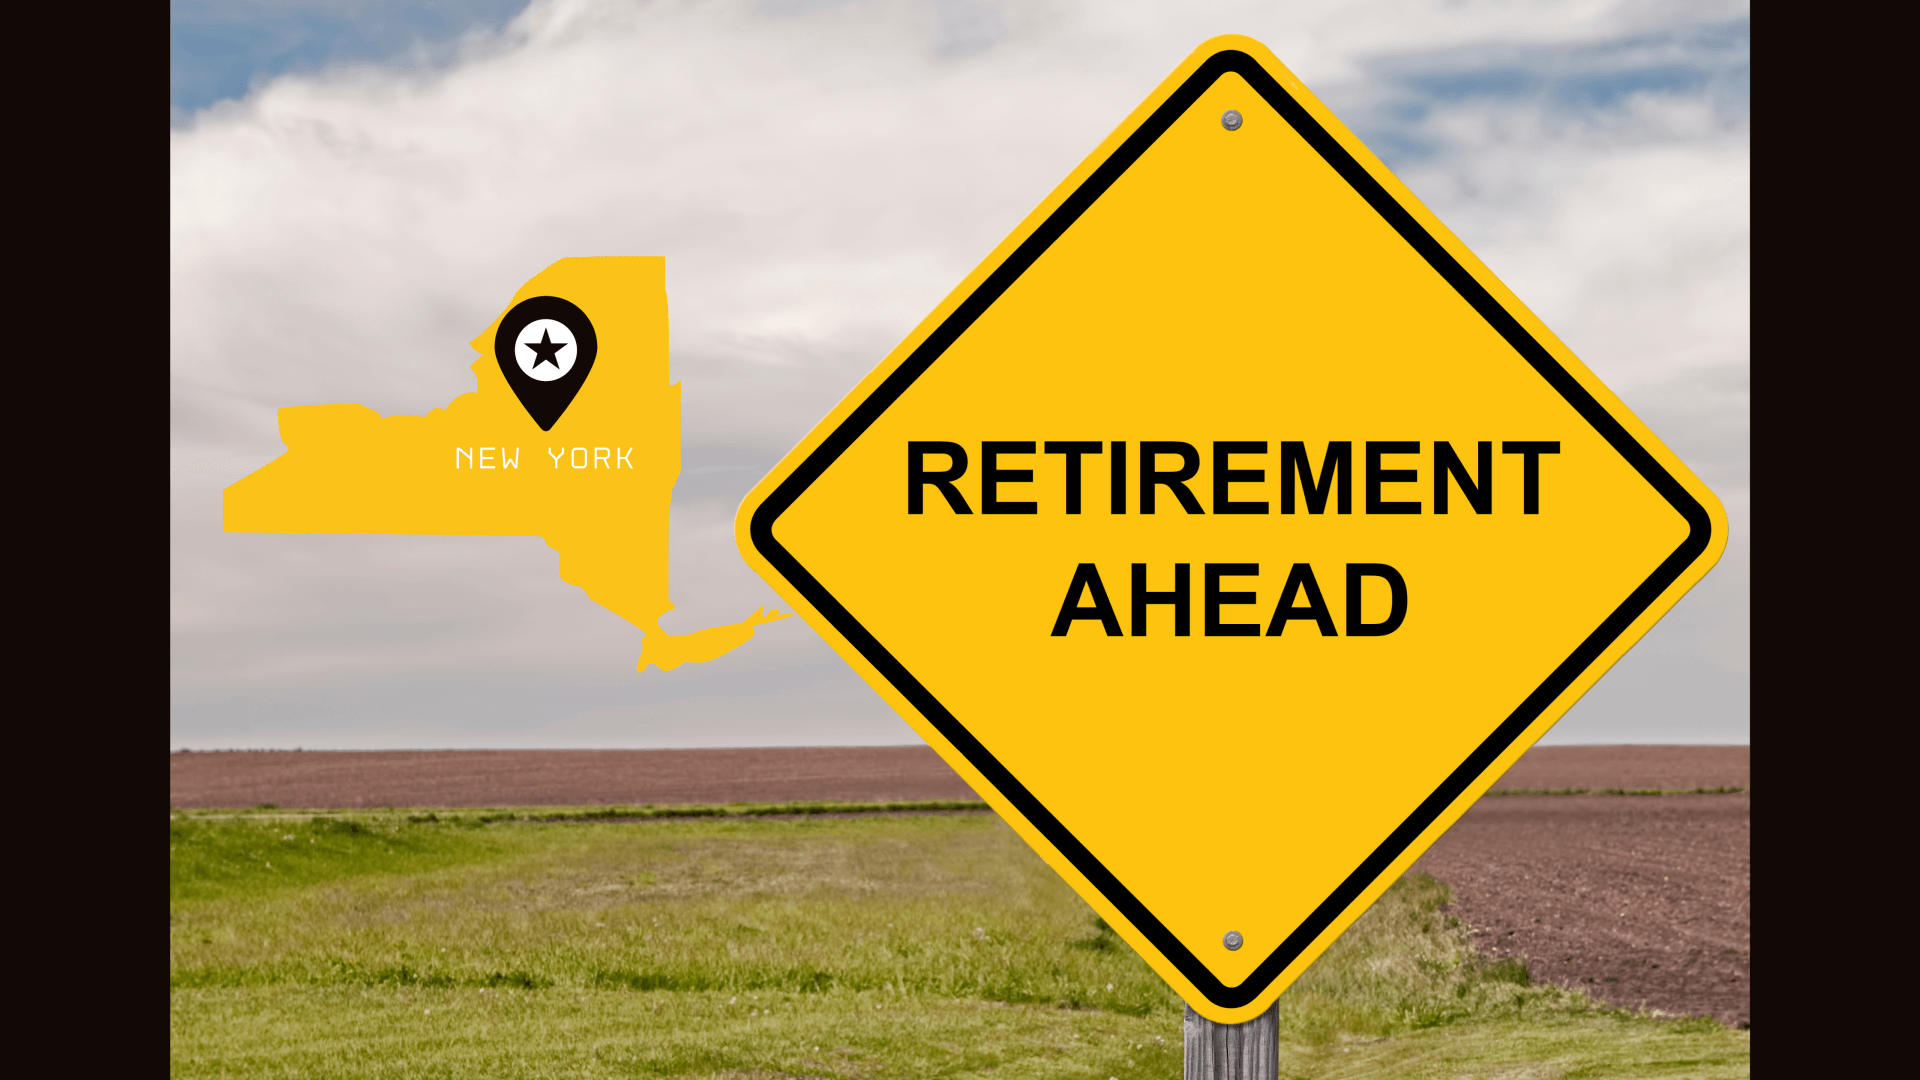 New York State has Mandated Private Employers to Provide a Retirement Plan Option to their Employees